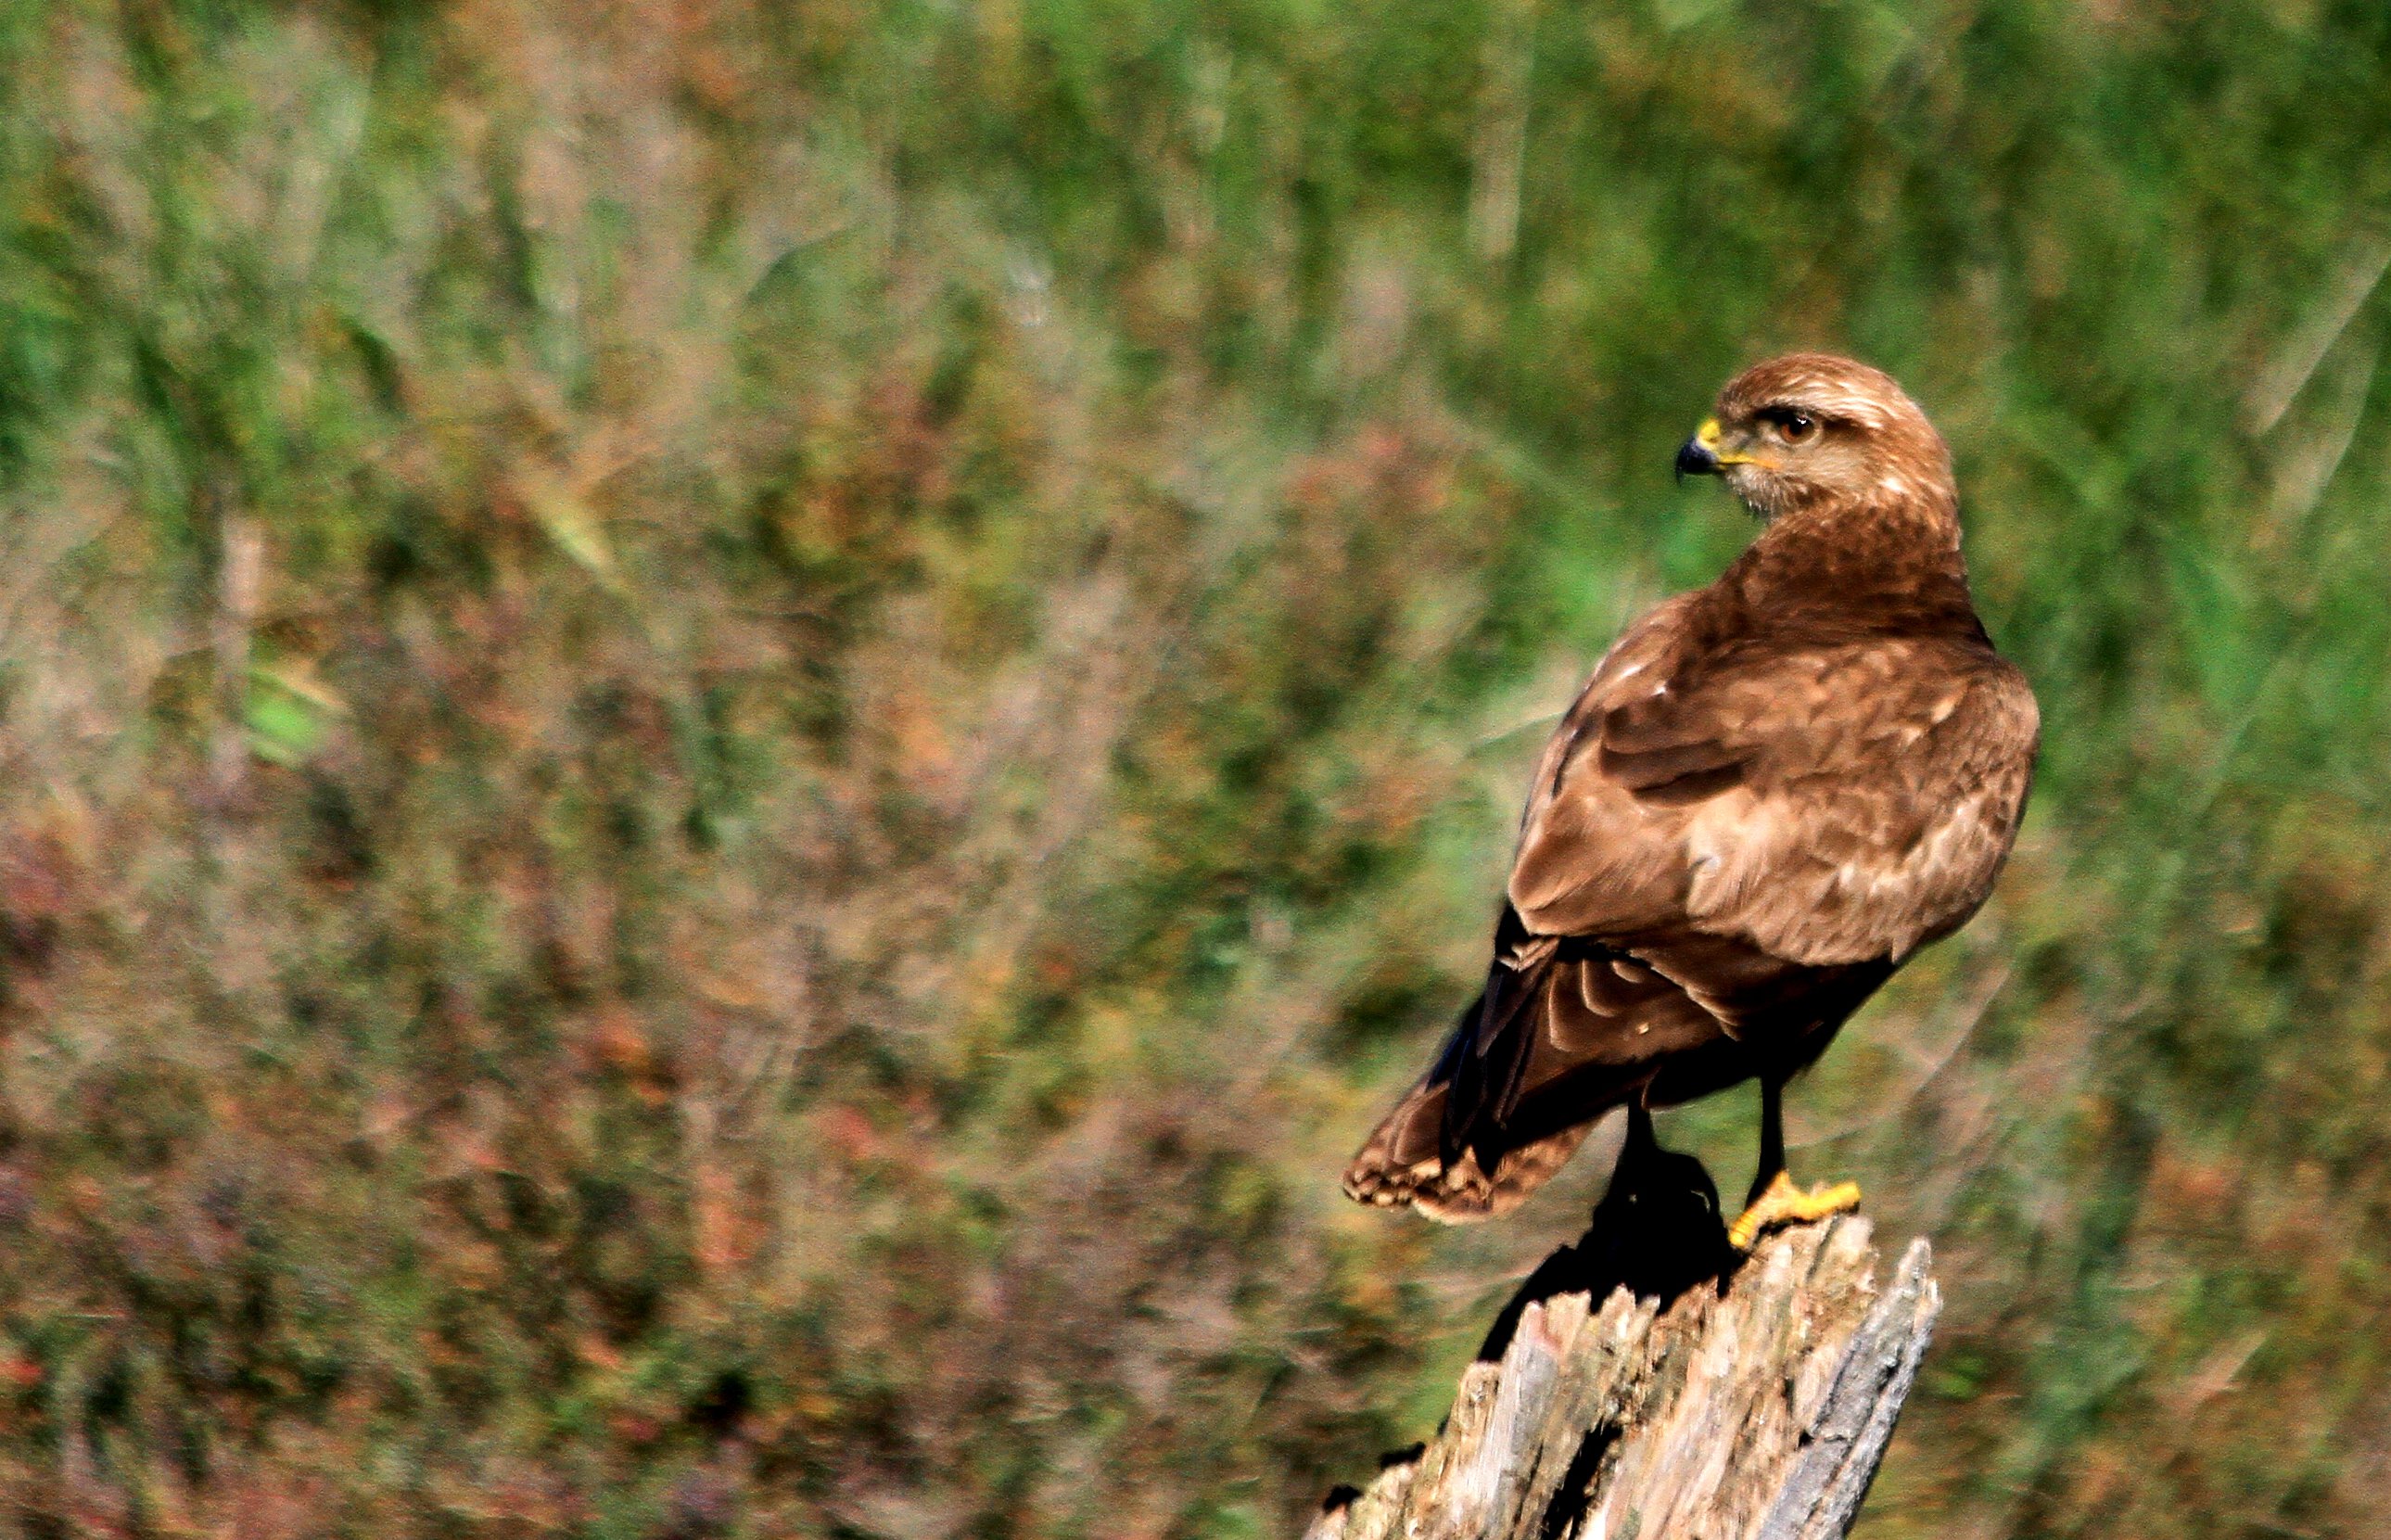 Buzzard in the post looking back